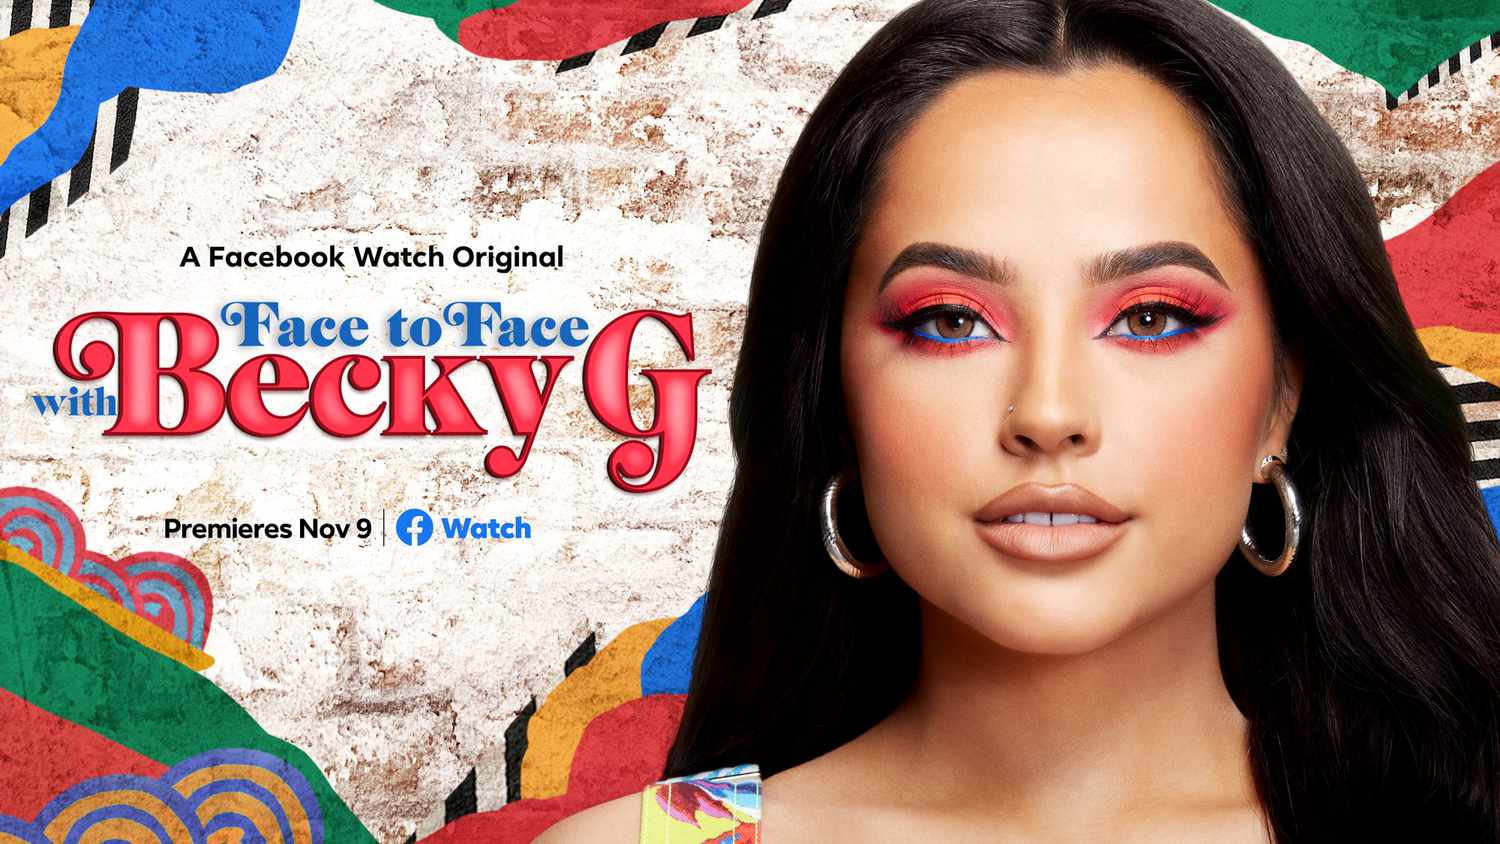 Face to Face with Becky G/Facebook Watch